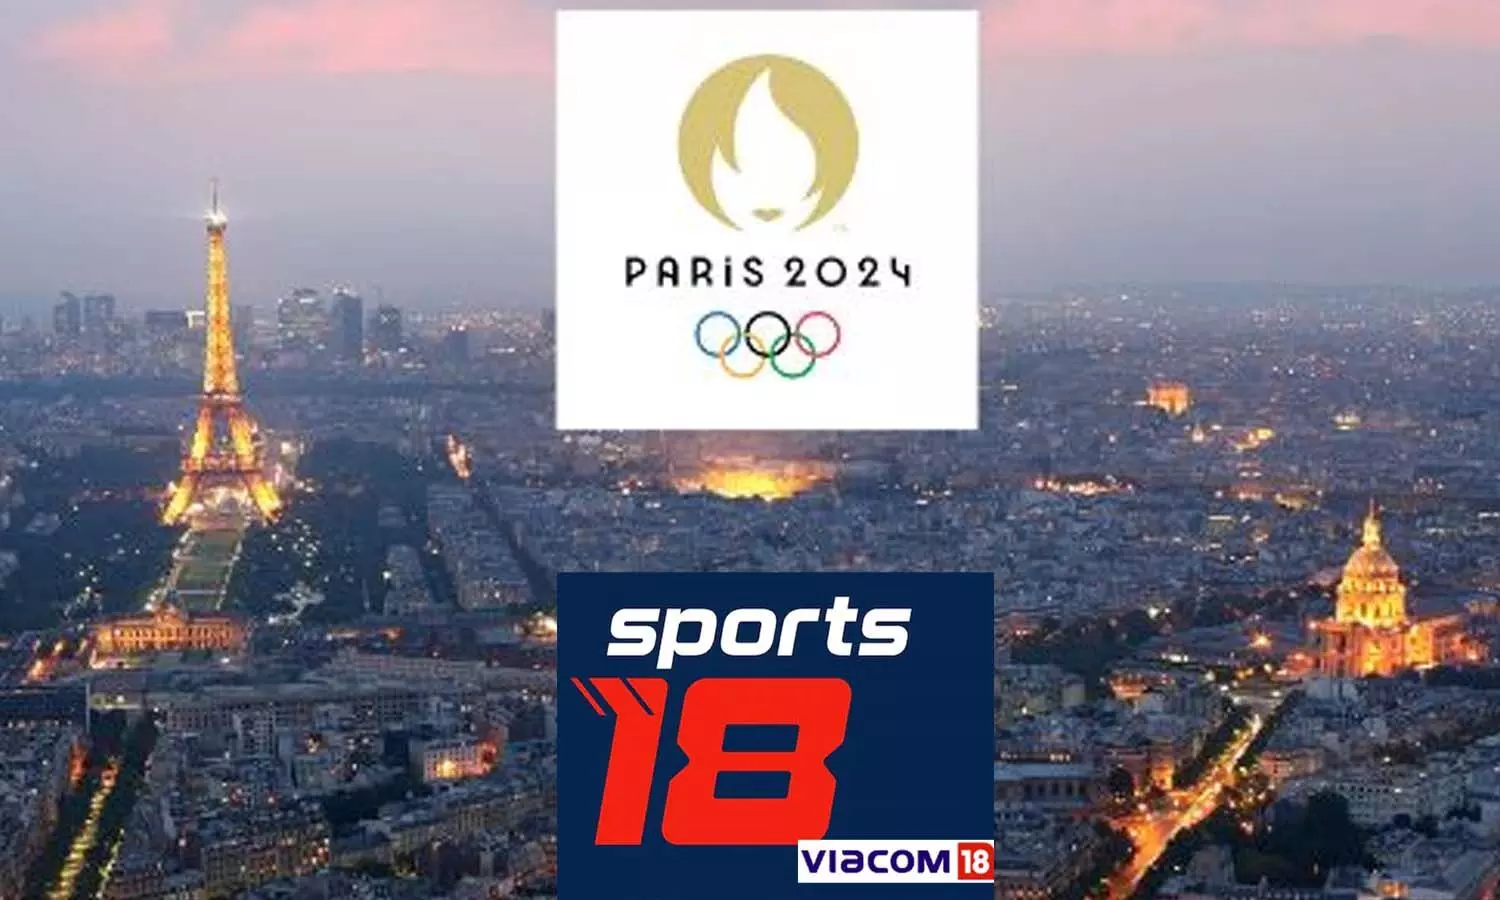 Viacom18 to broadcast Paris Olympics 2024 in India and the Indian subcontinent